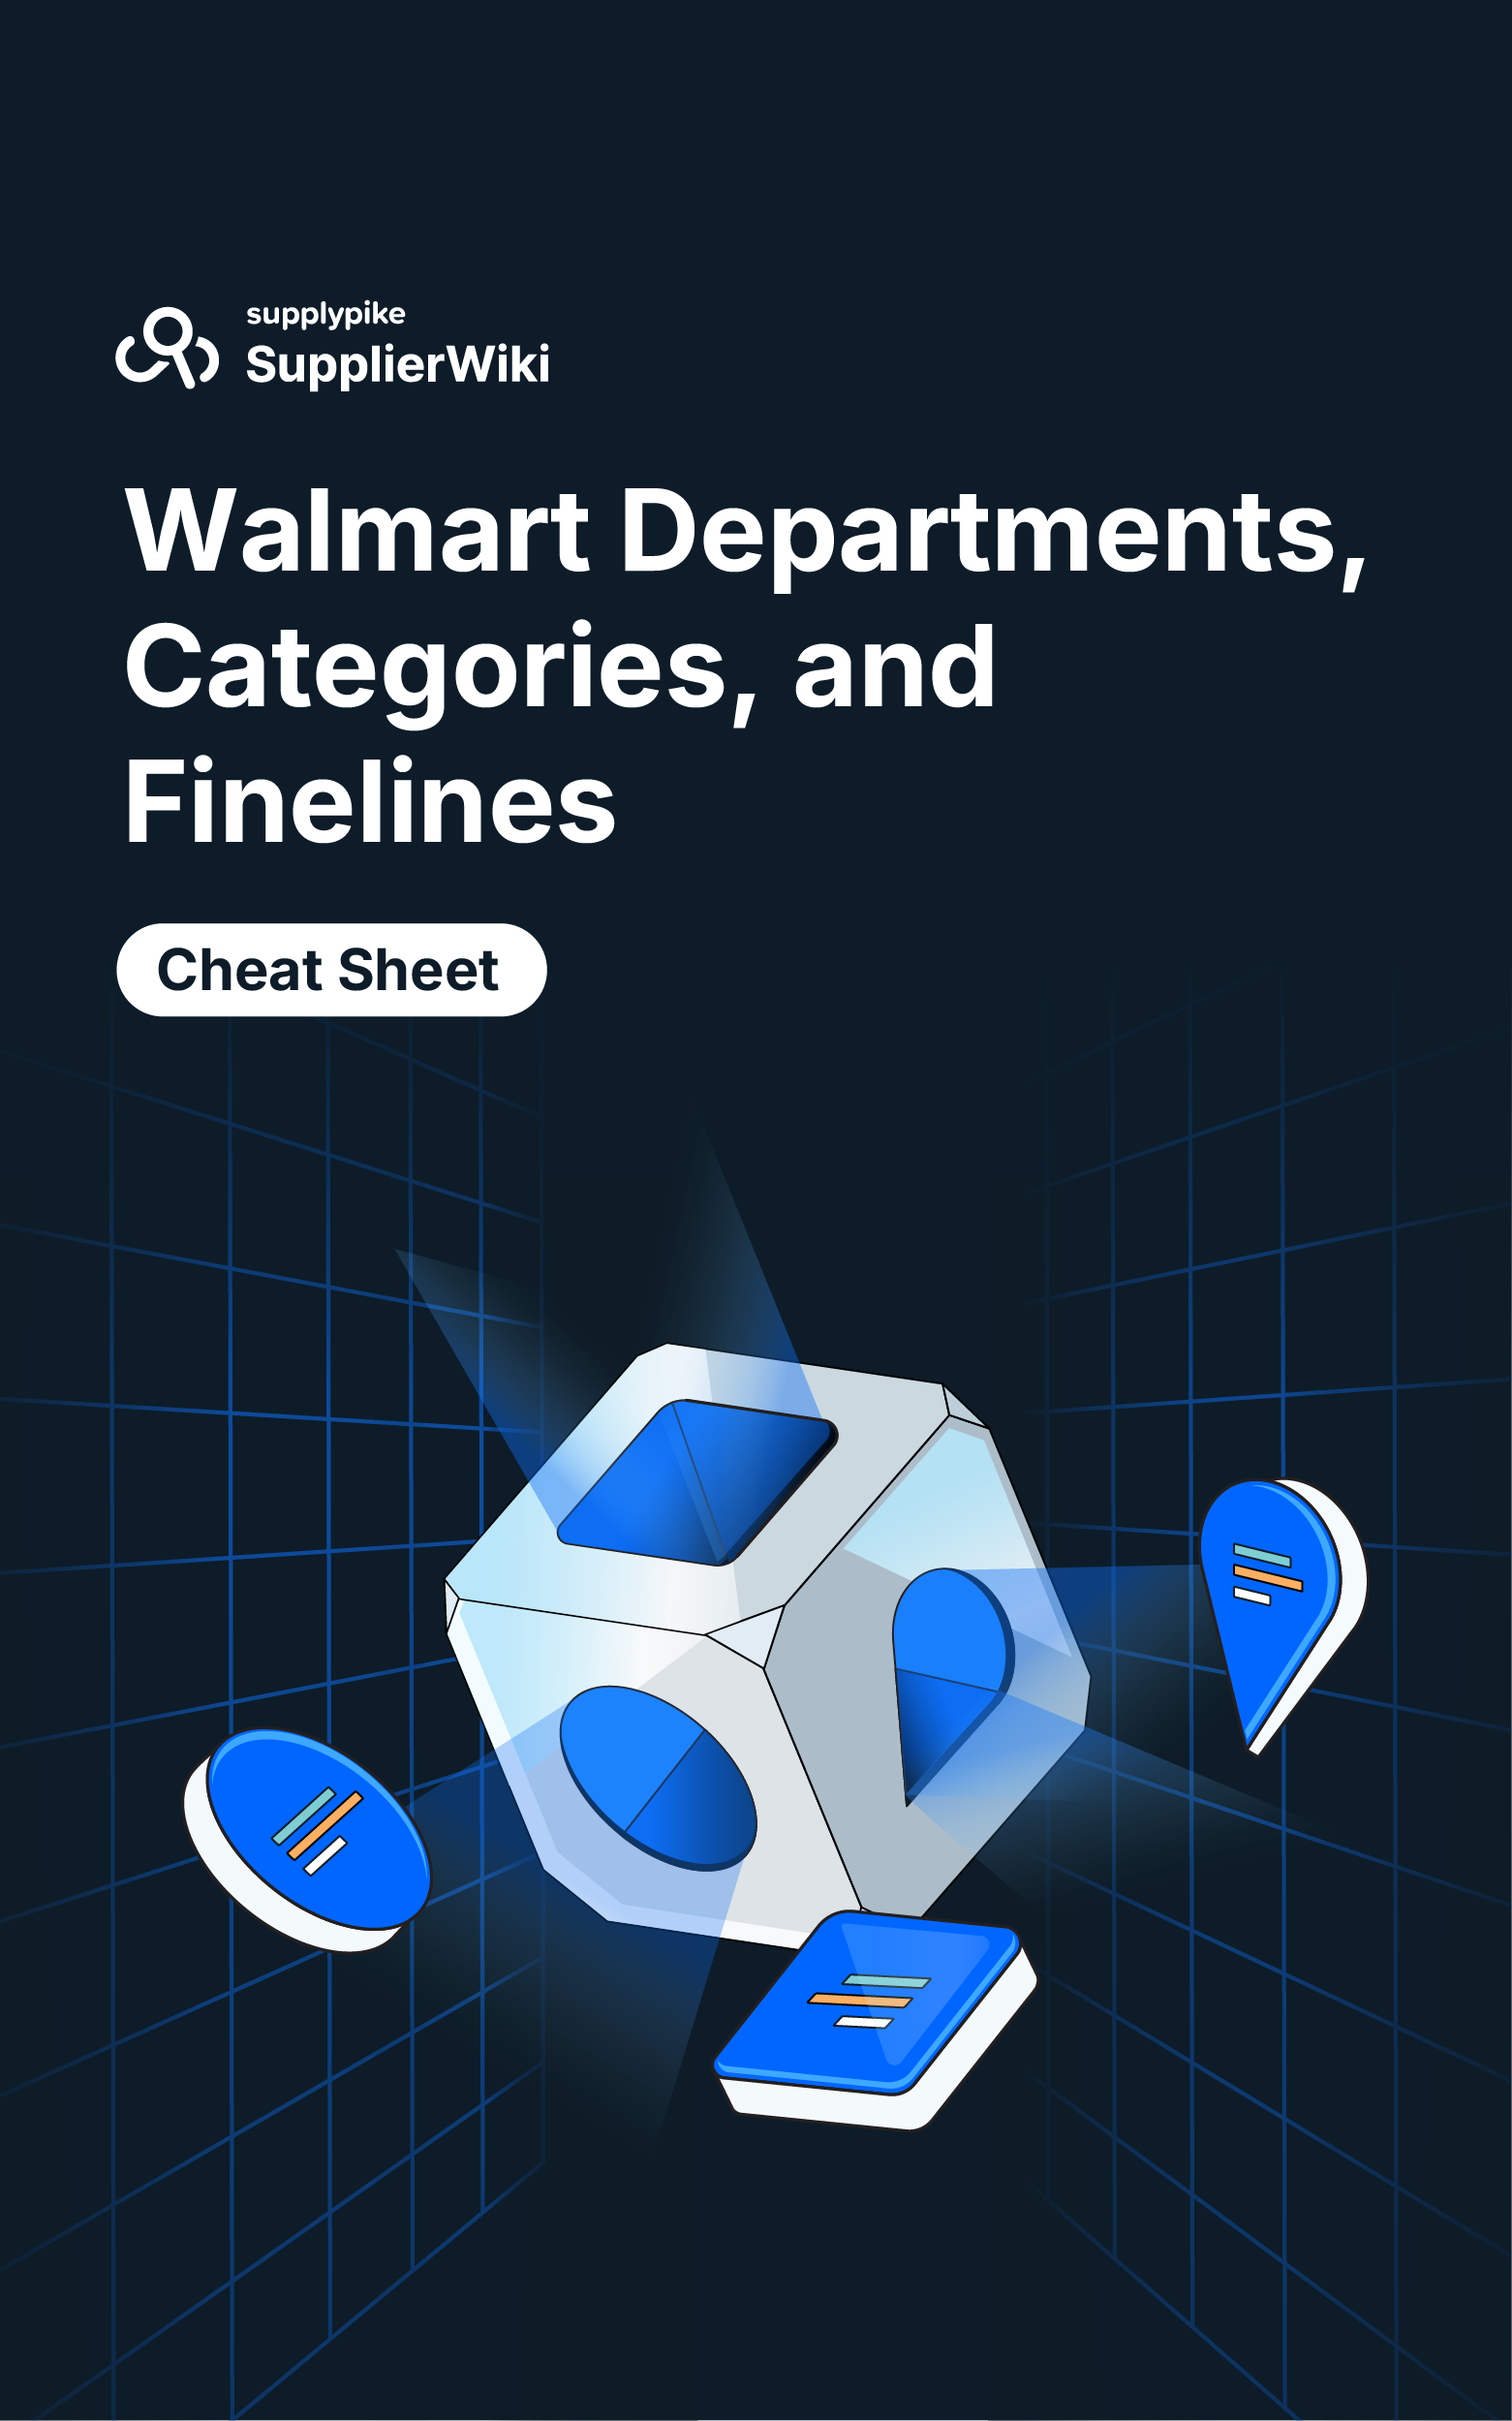 Walmart Departments, Categories, and Finelines Cheat Sheet